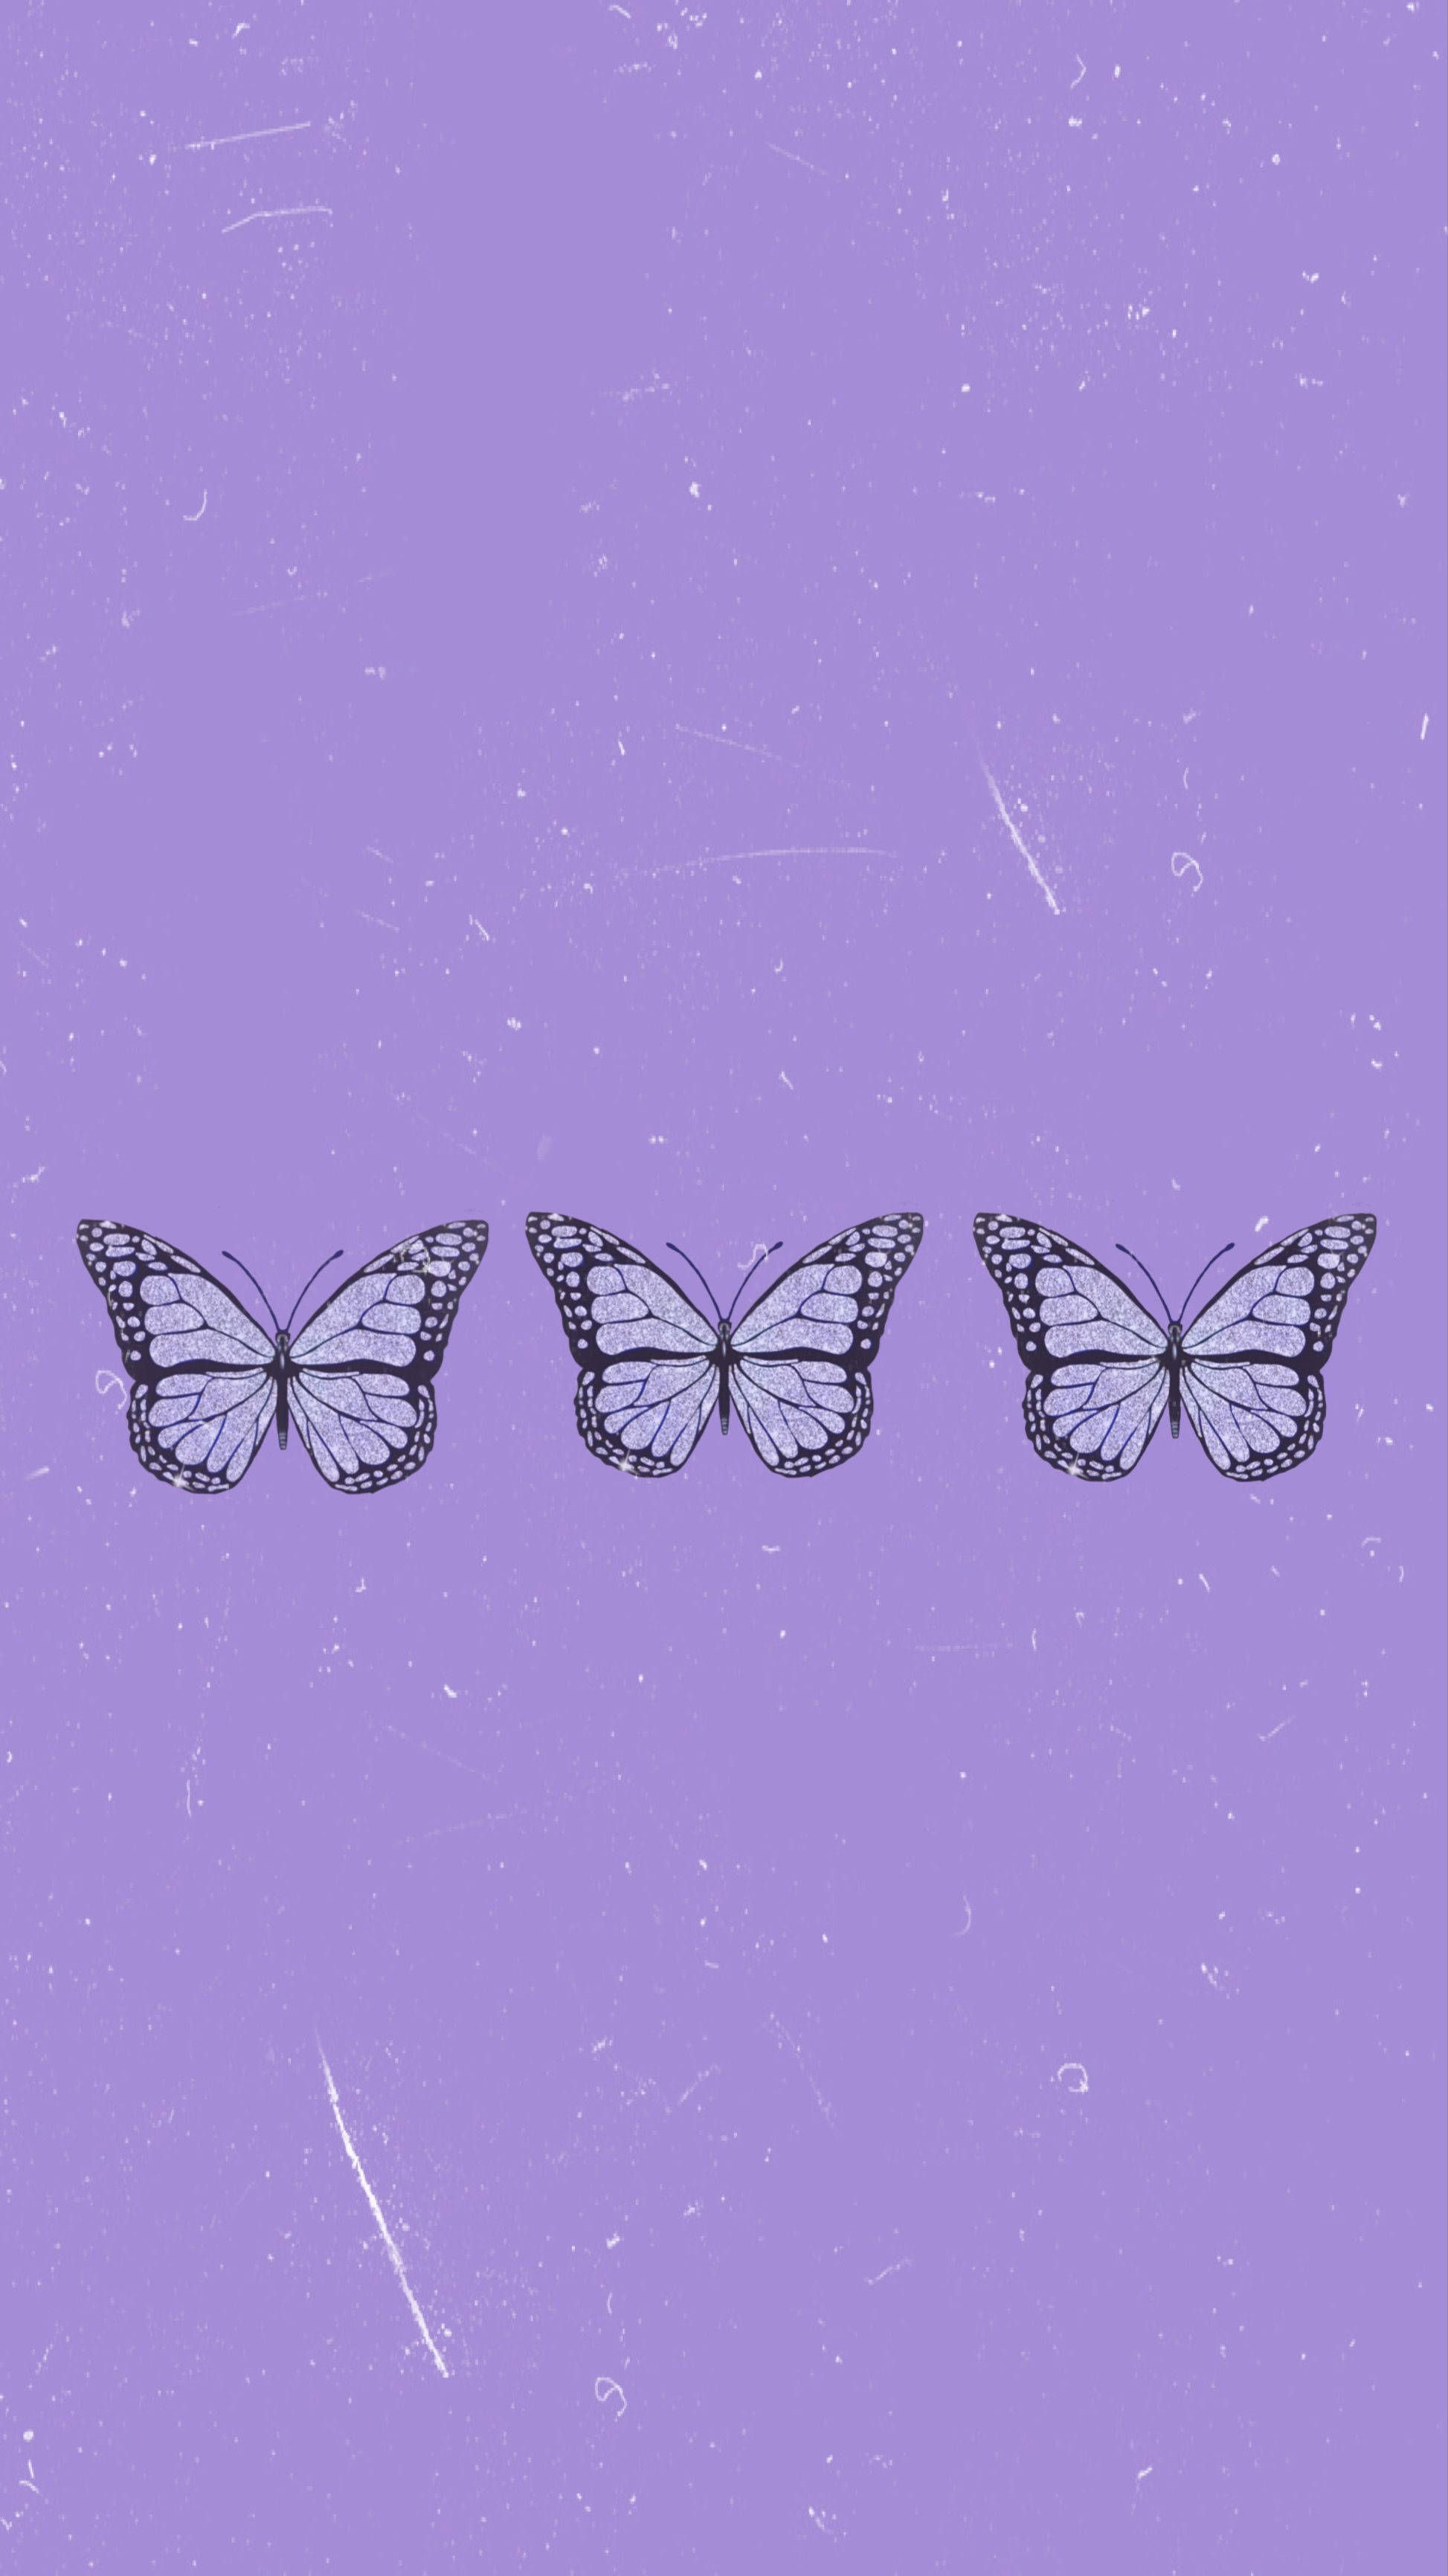 A purple background with three butterflies on it - Butterfly